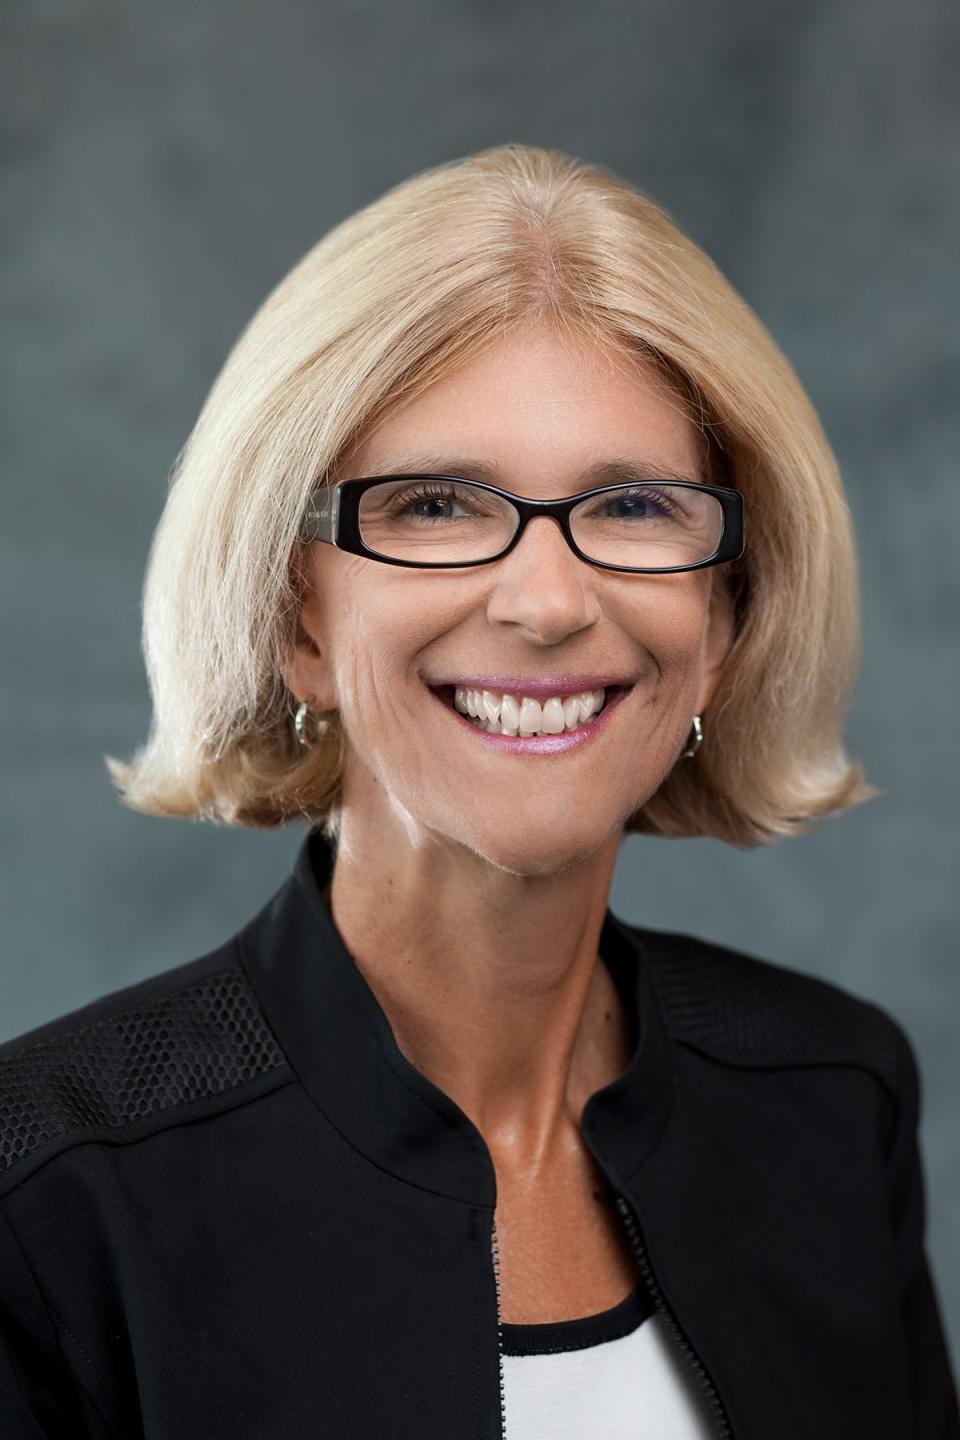 Cathy Jacobson, CEO of Froedtert Health